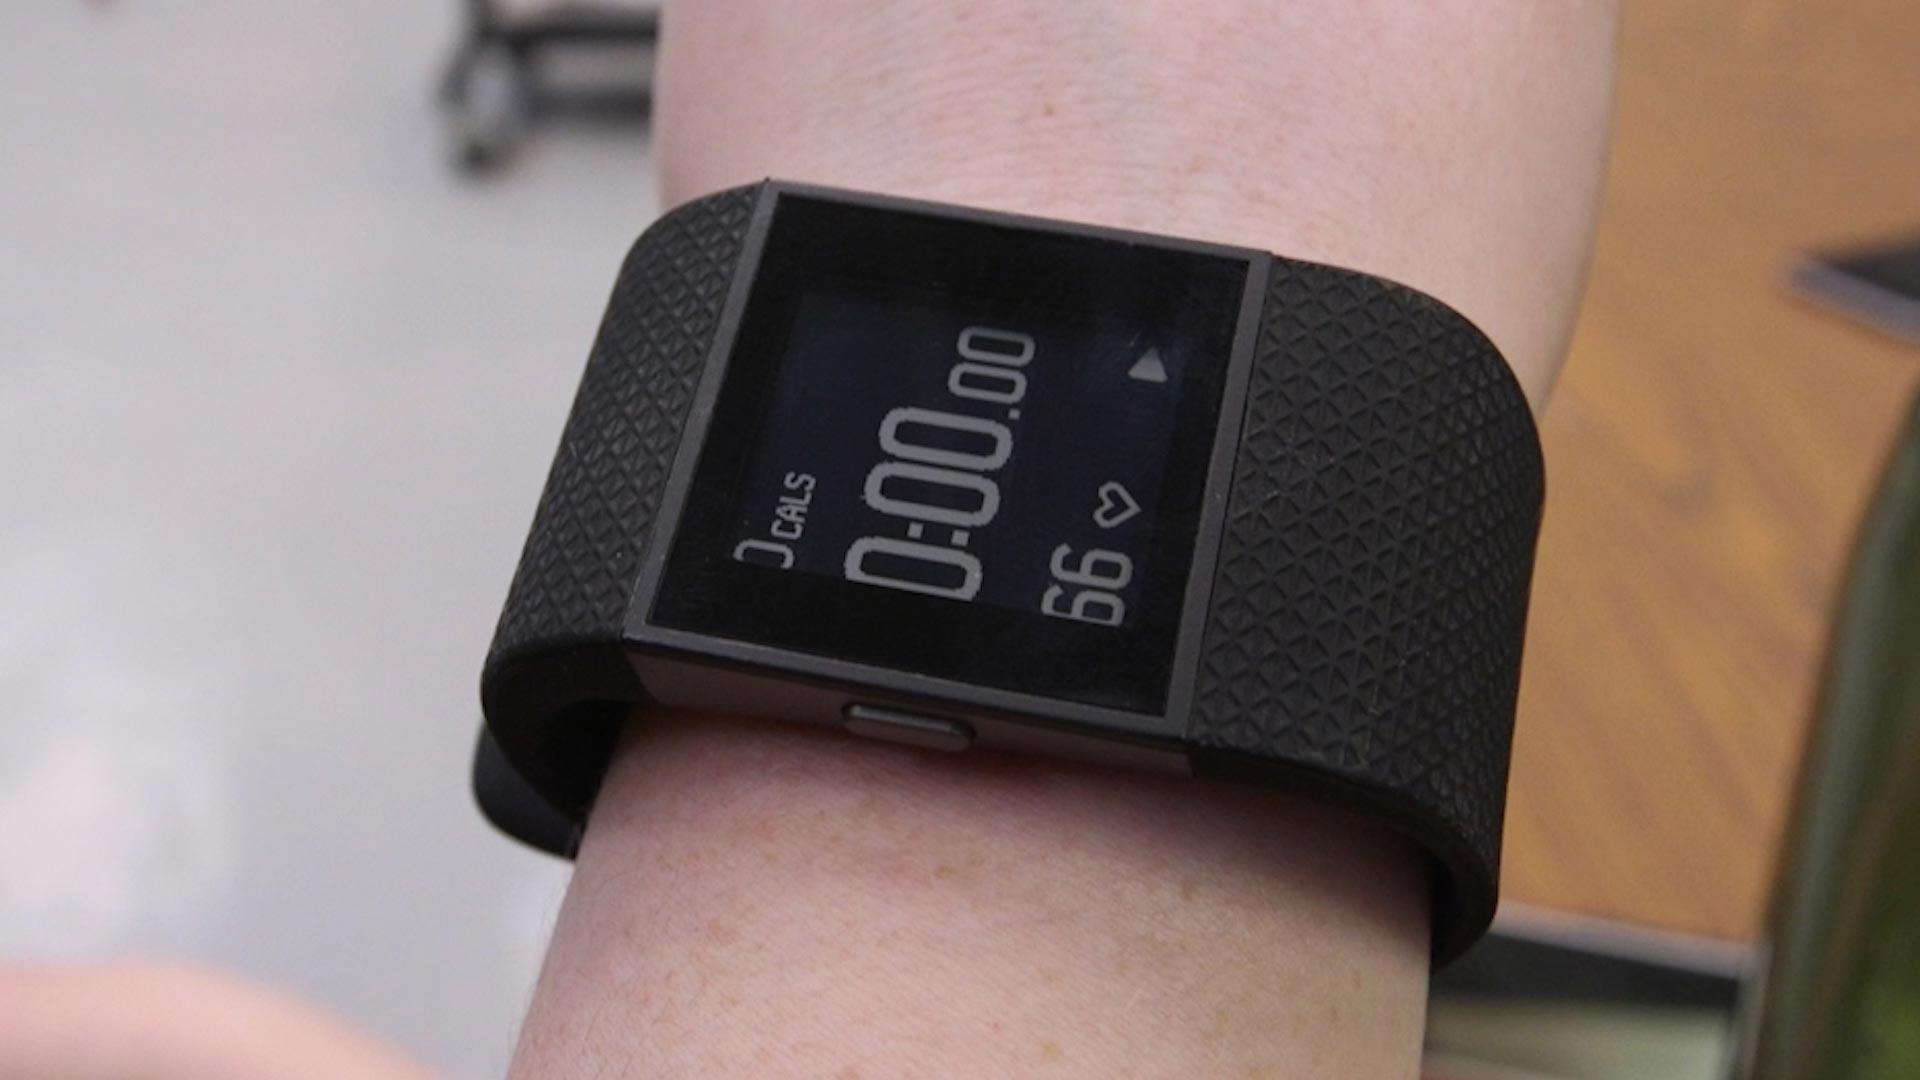 Taking Pulse of Fitbit's Contested Heart Rate Monitors - Reports